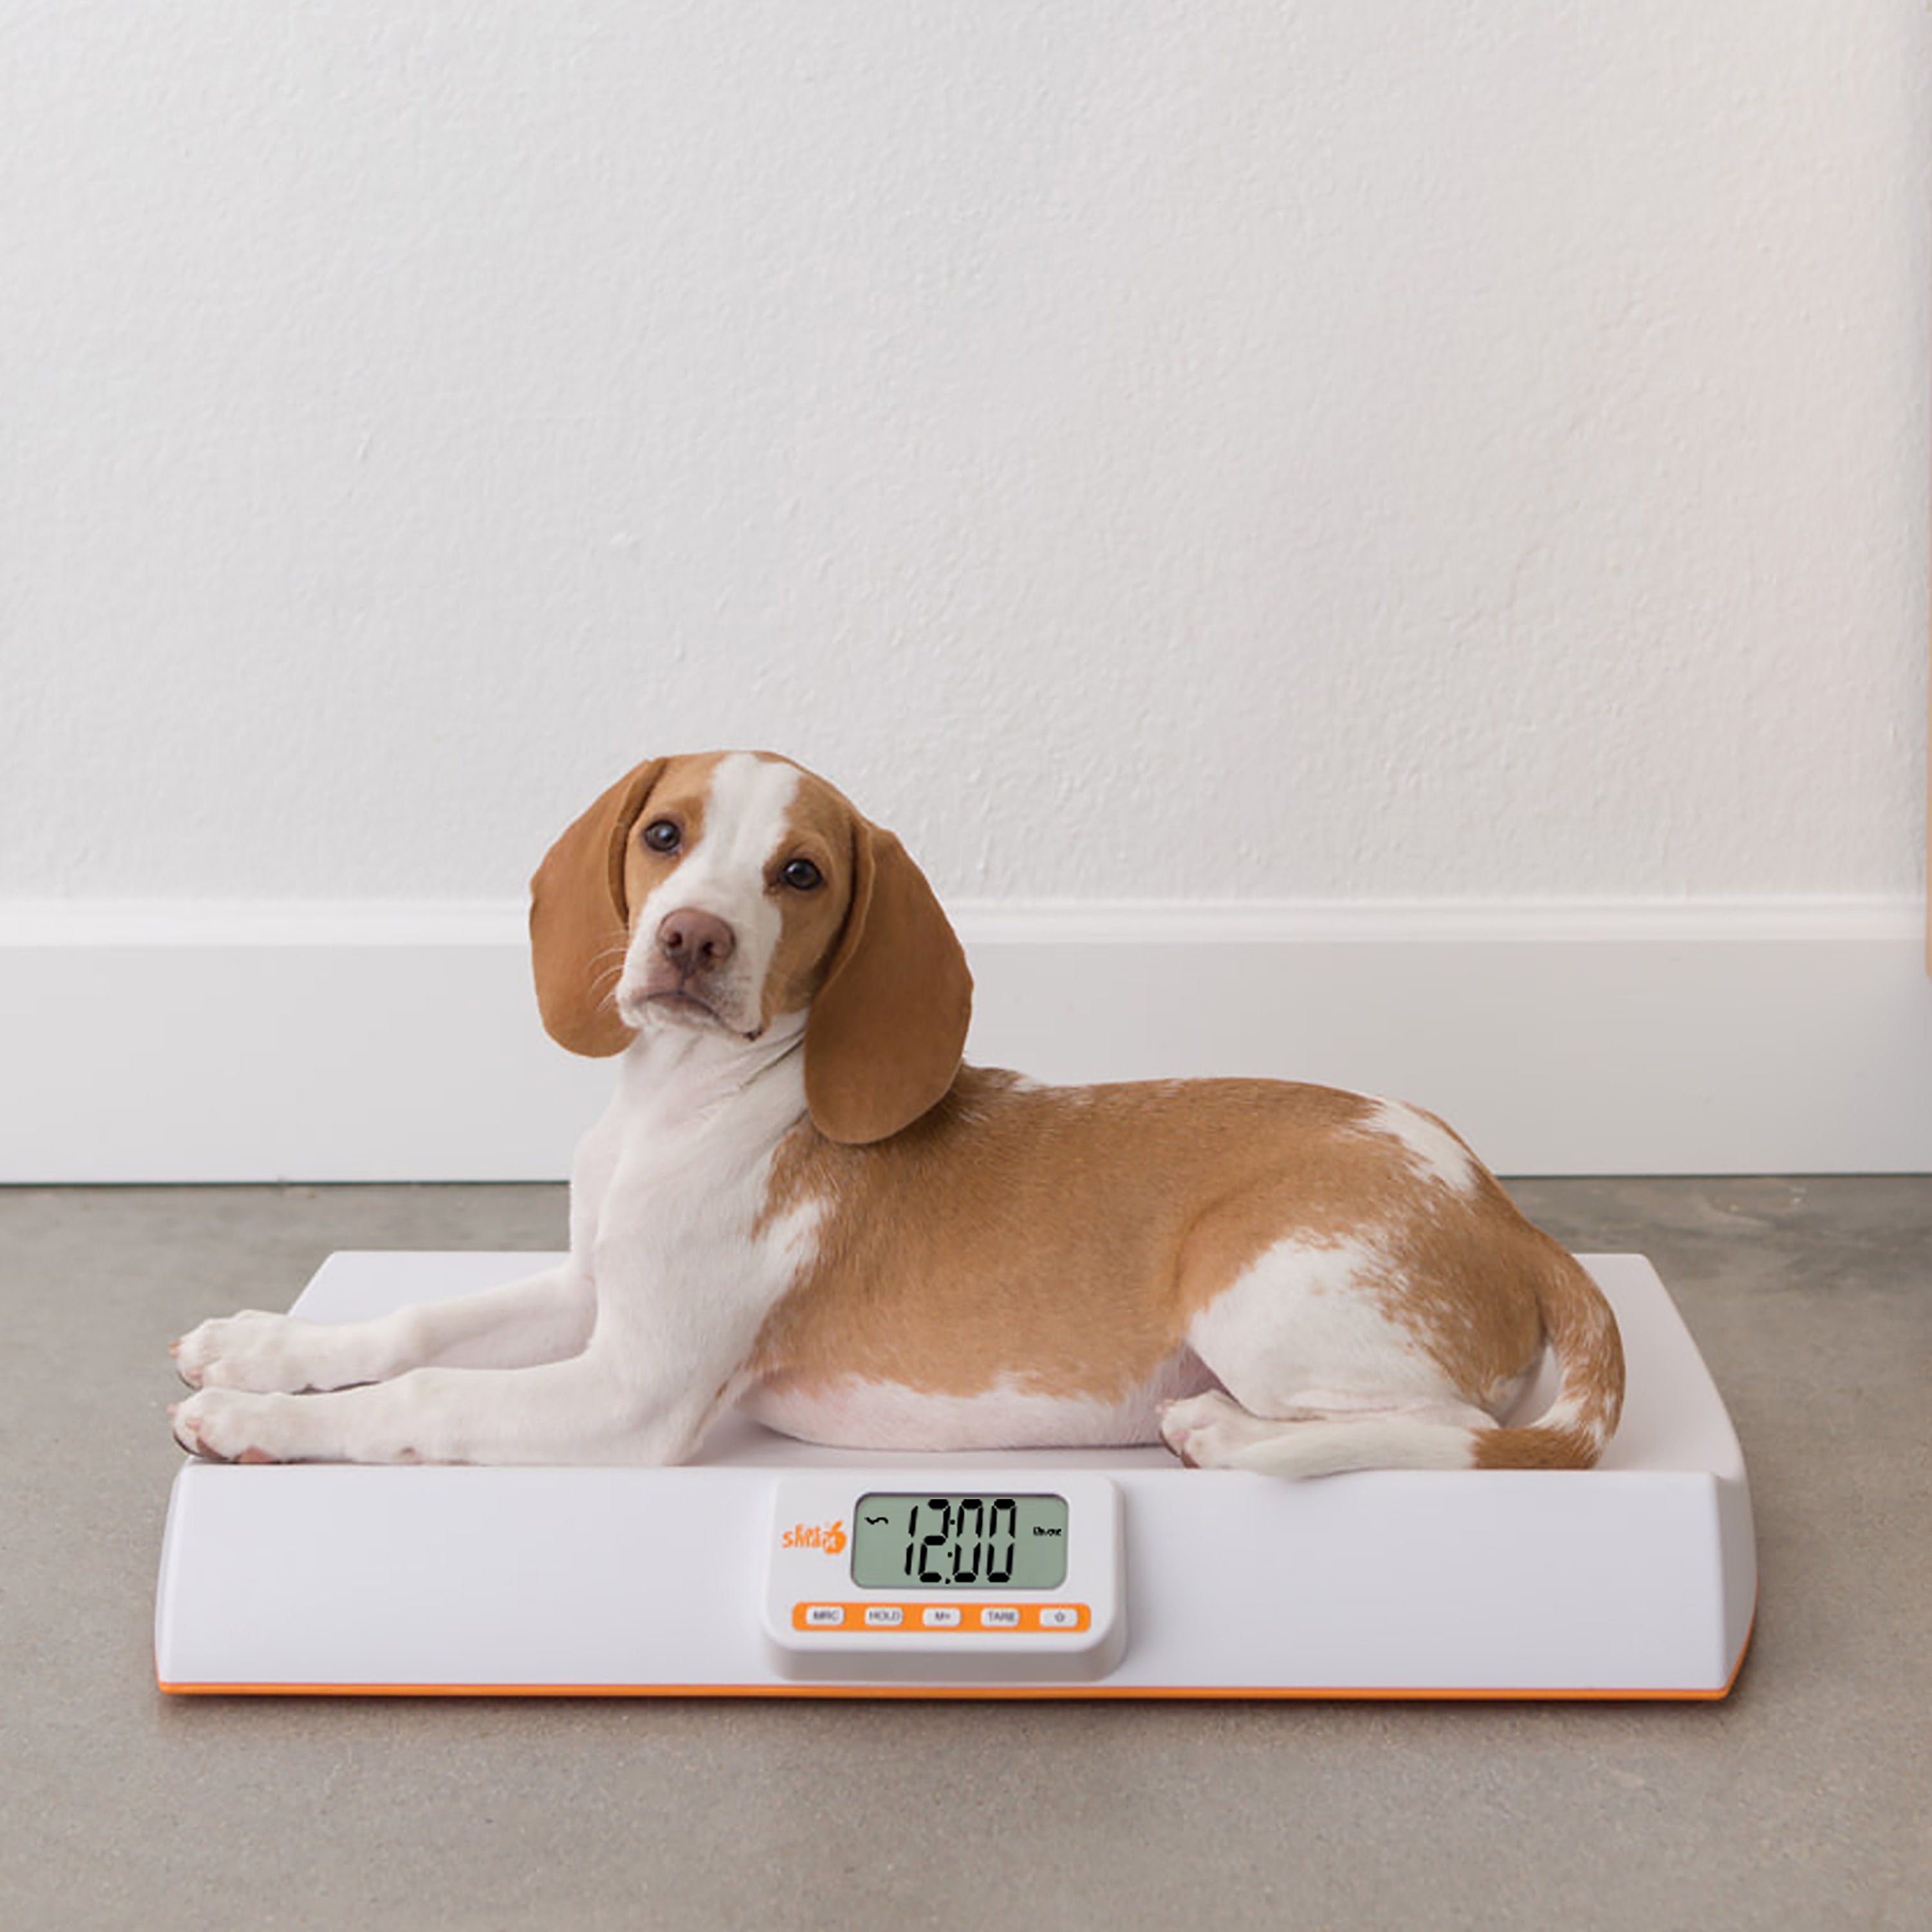 Buy Billion Pet Weight Scale Digital Pet Scale Electronic Pet Weight Scale  With Tray Small Precision Portable Small Dog / Cat / Rabbit, etc. Weighing  Nursing Care Obesity Countermeasures Puppy Kitten Health